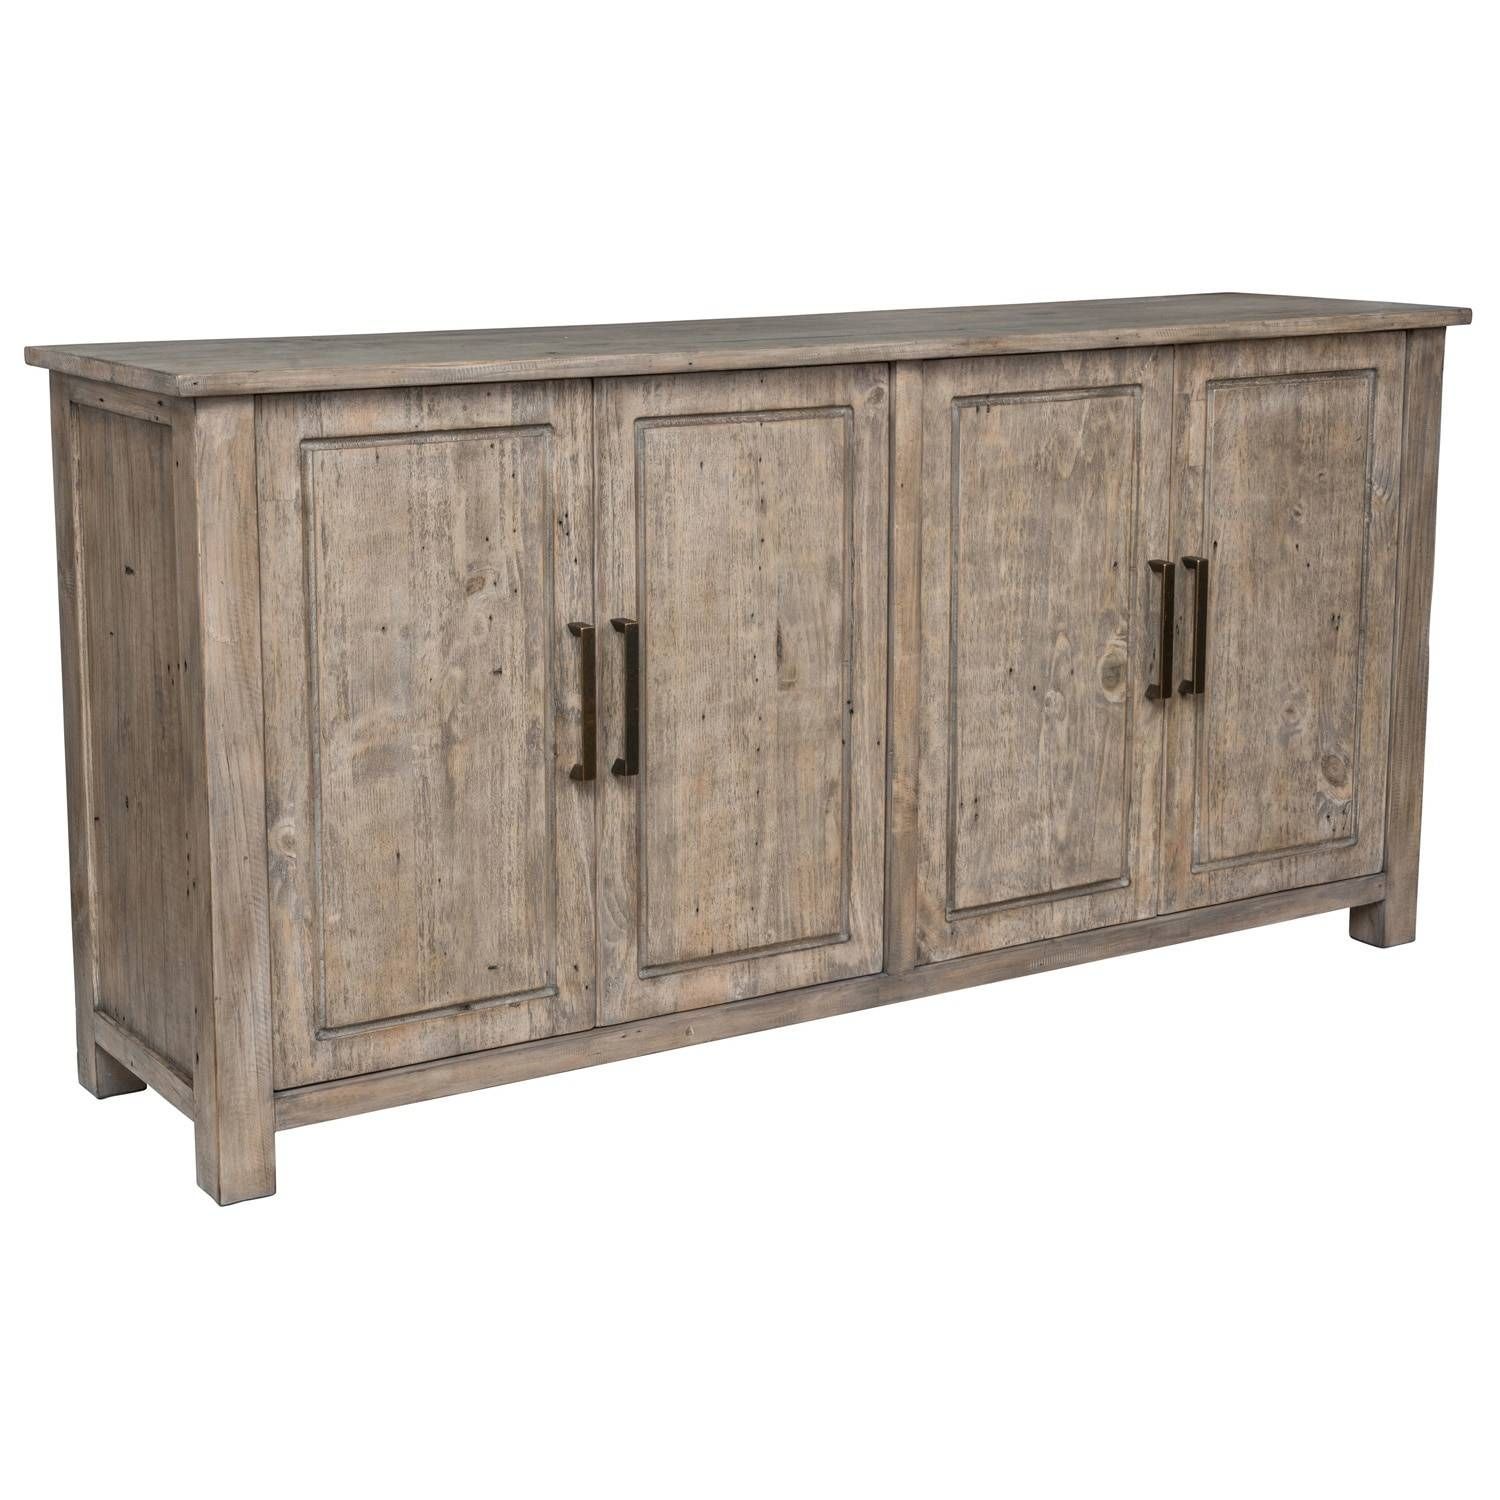 Aires Reclaimed Wood 72 Inch Sideboardkosas Home – Free With 2018 72 Inch Sideboards (View 7 of 15)